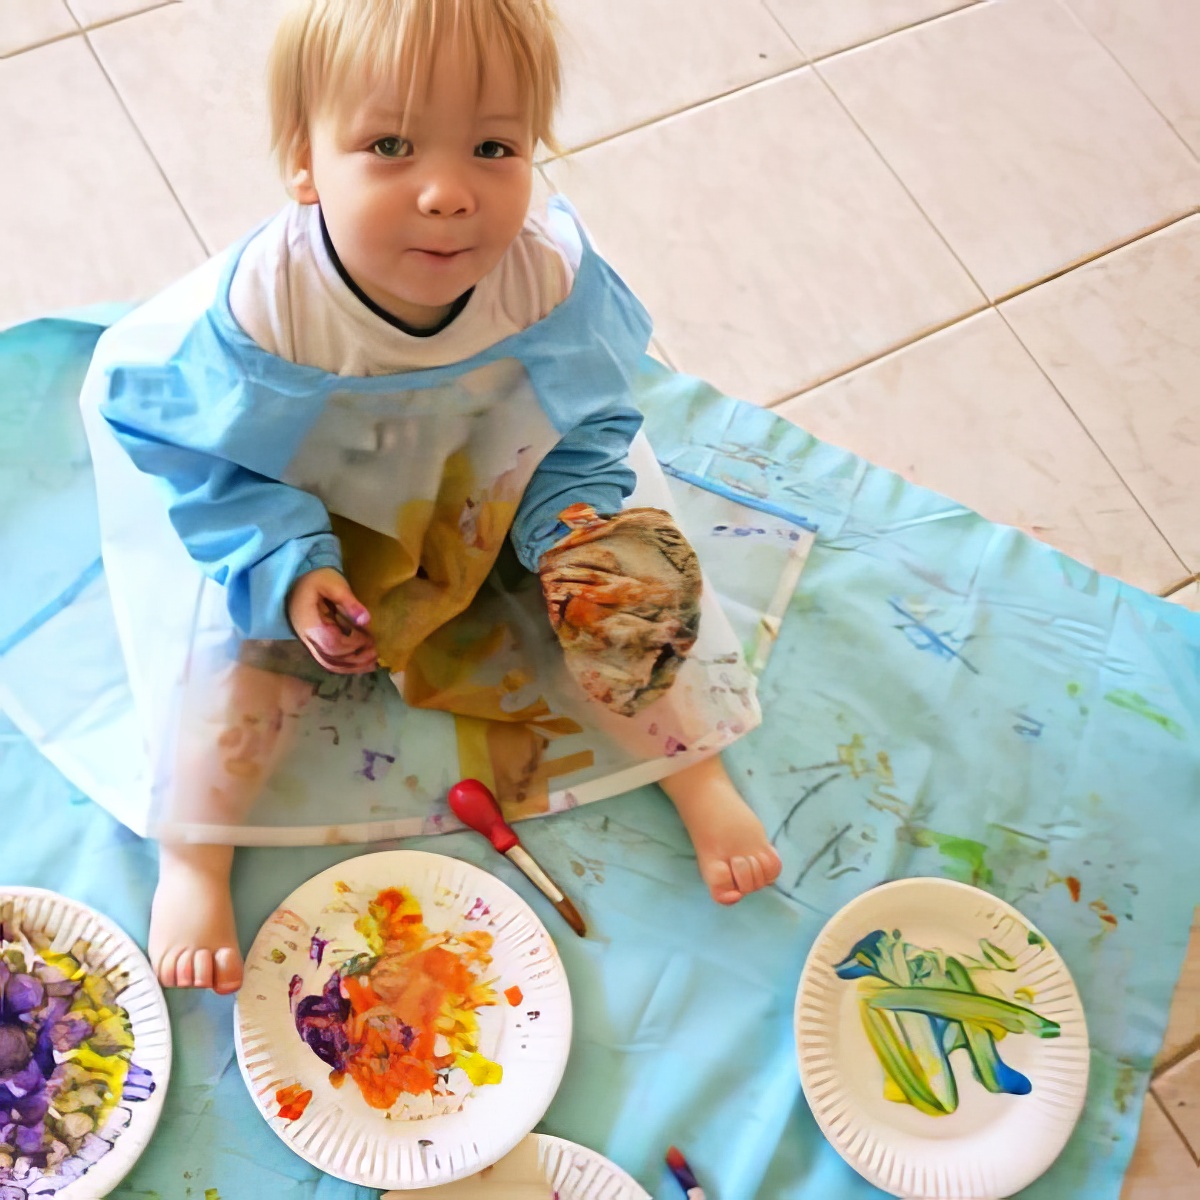 Use a paper plate instead of papers for your little ones to enjoy that canvass painting sessions today!